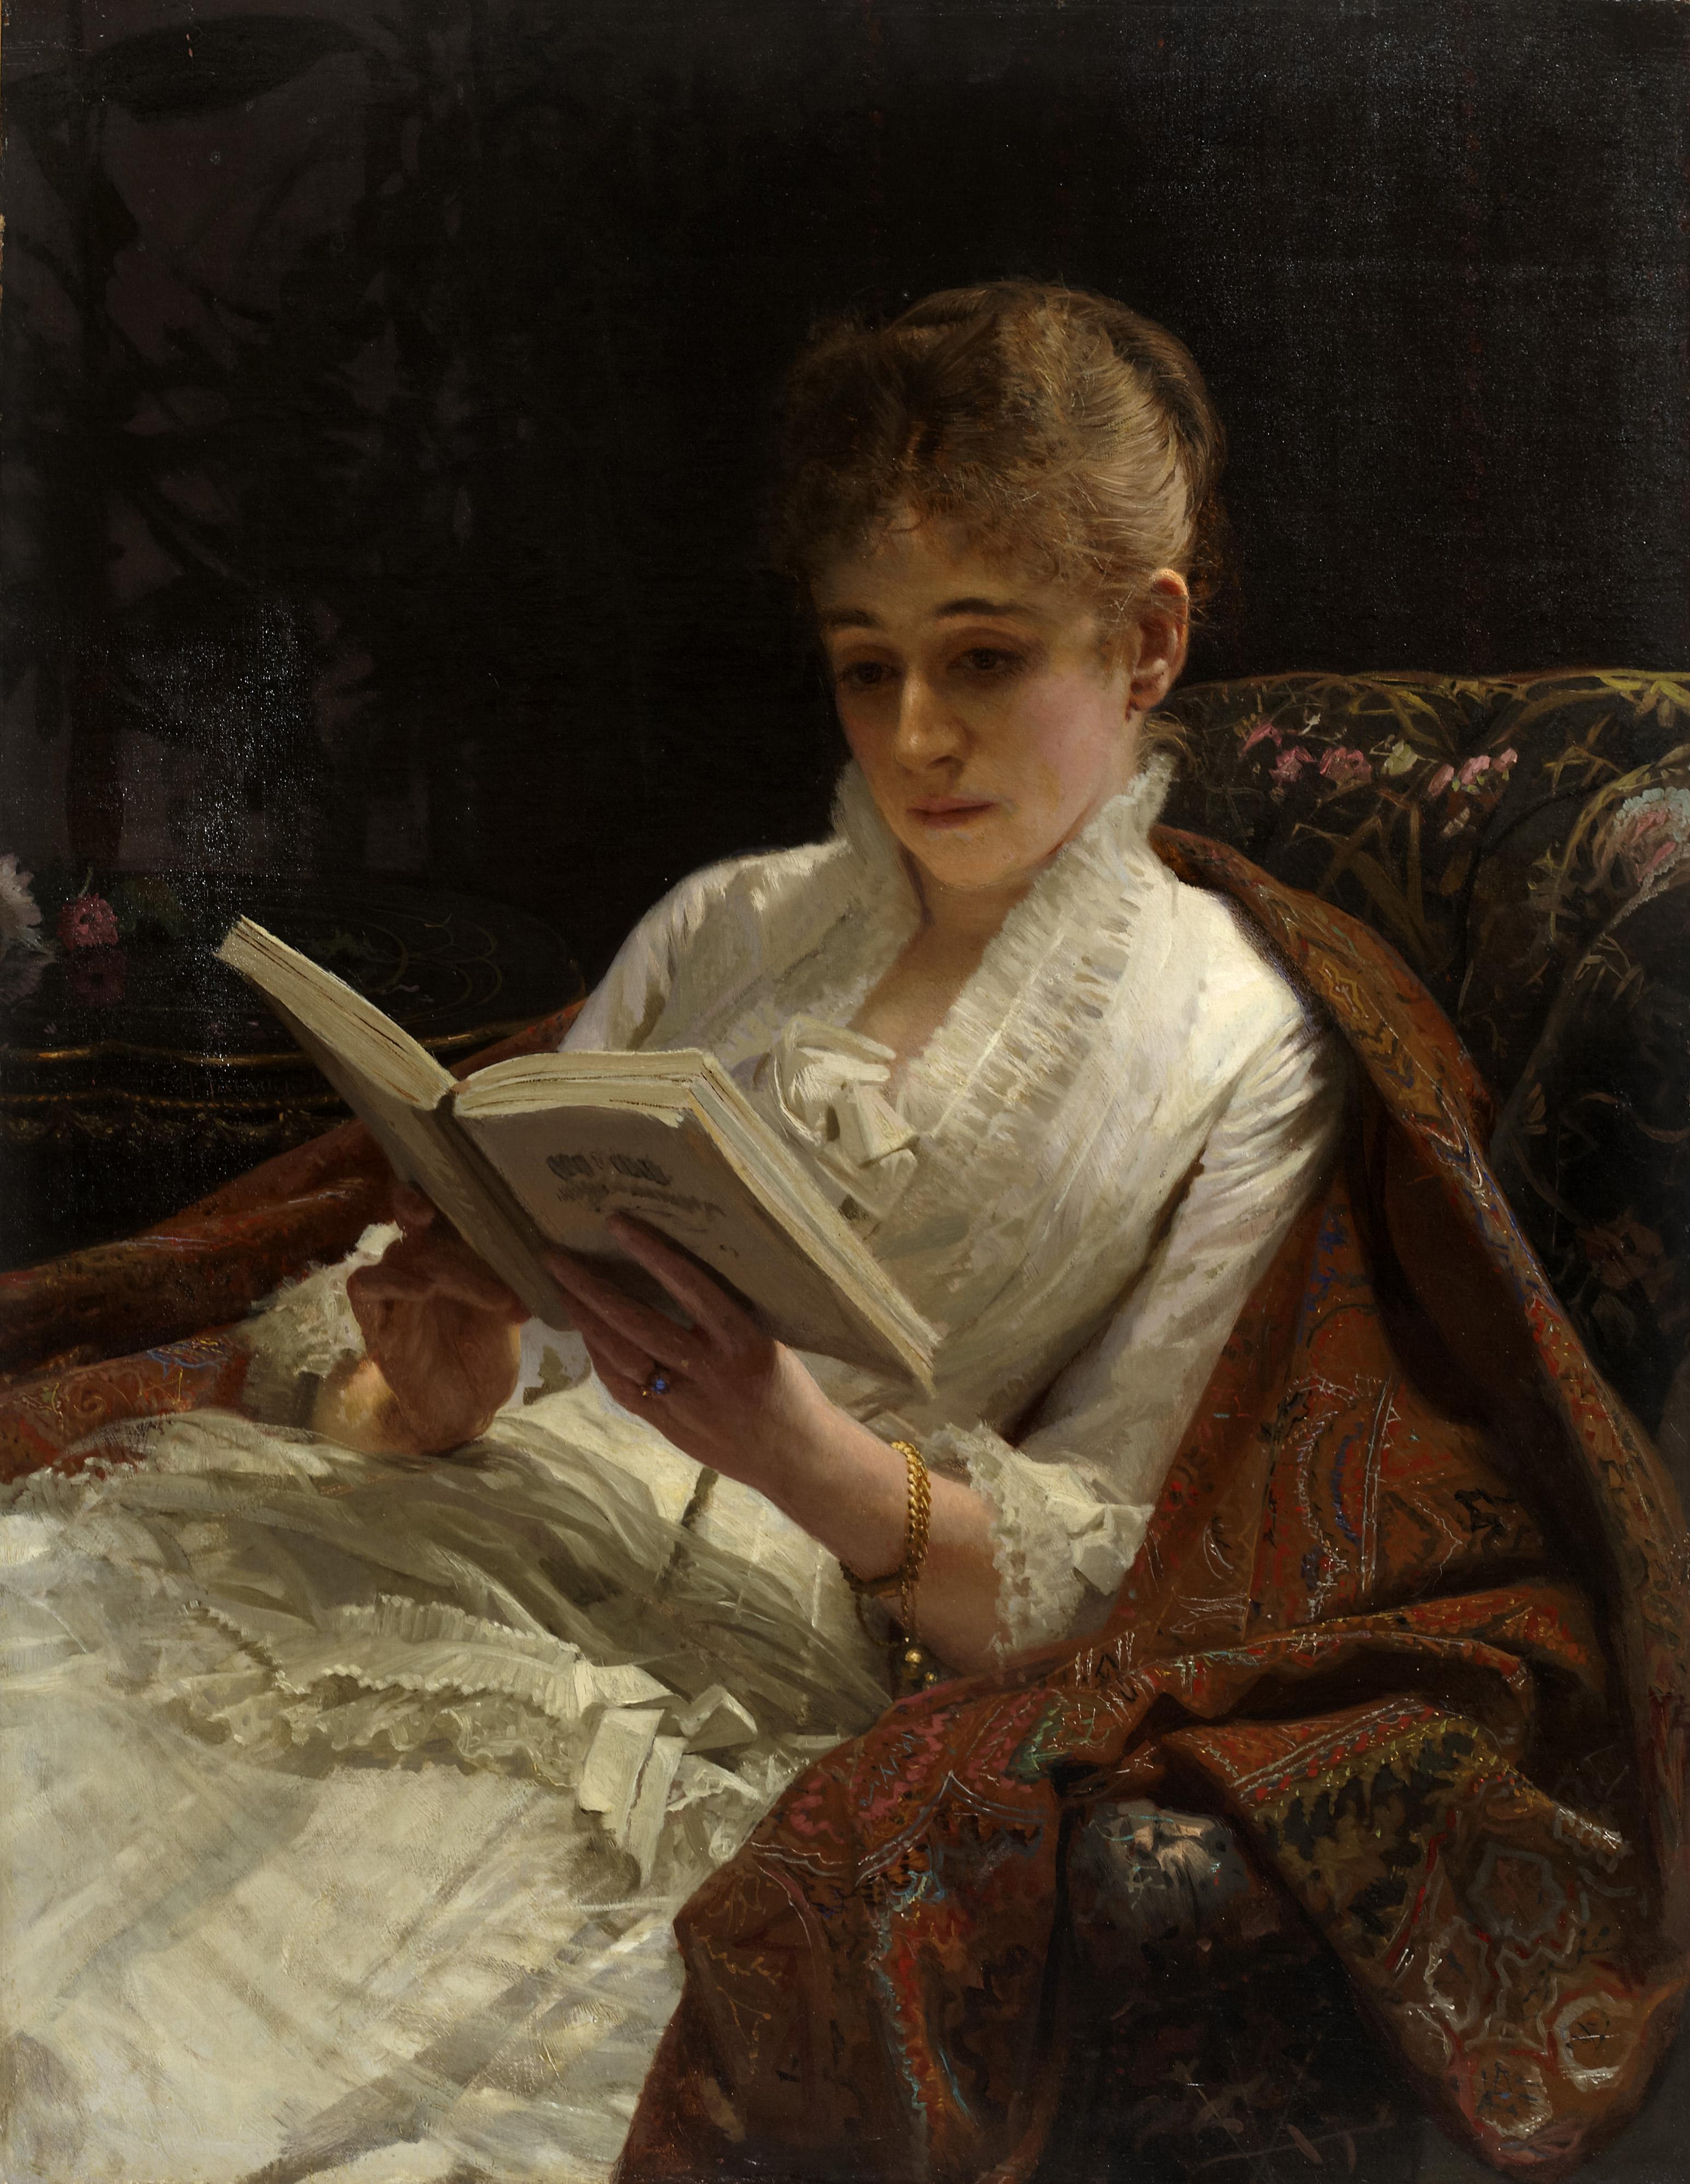 Portrait of a woman reading, painted by Ivan Kramskoi, Imperial Russia, 1881. Currently on display at the Yekaterinburg Museum of Fine Arts.jpg